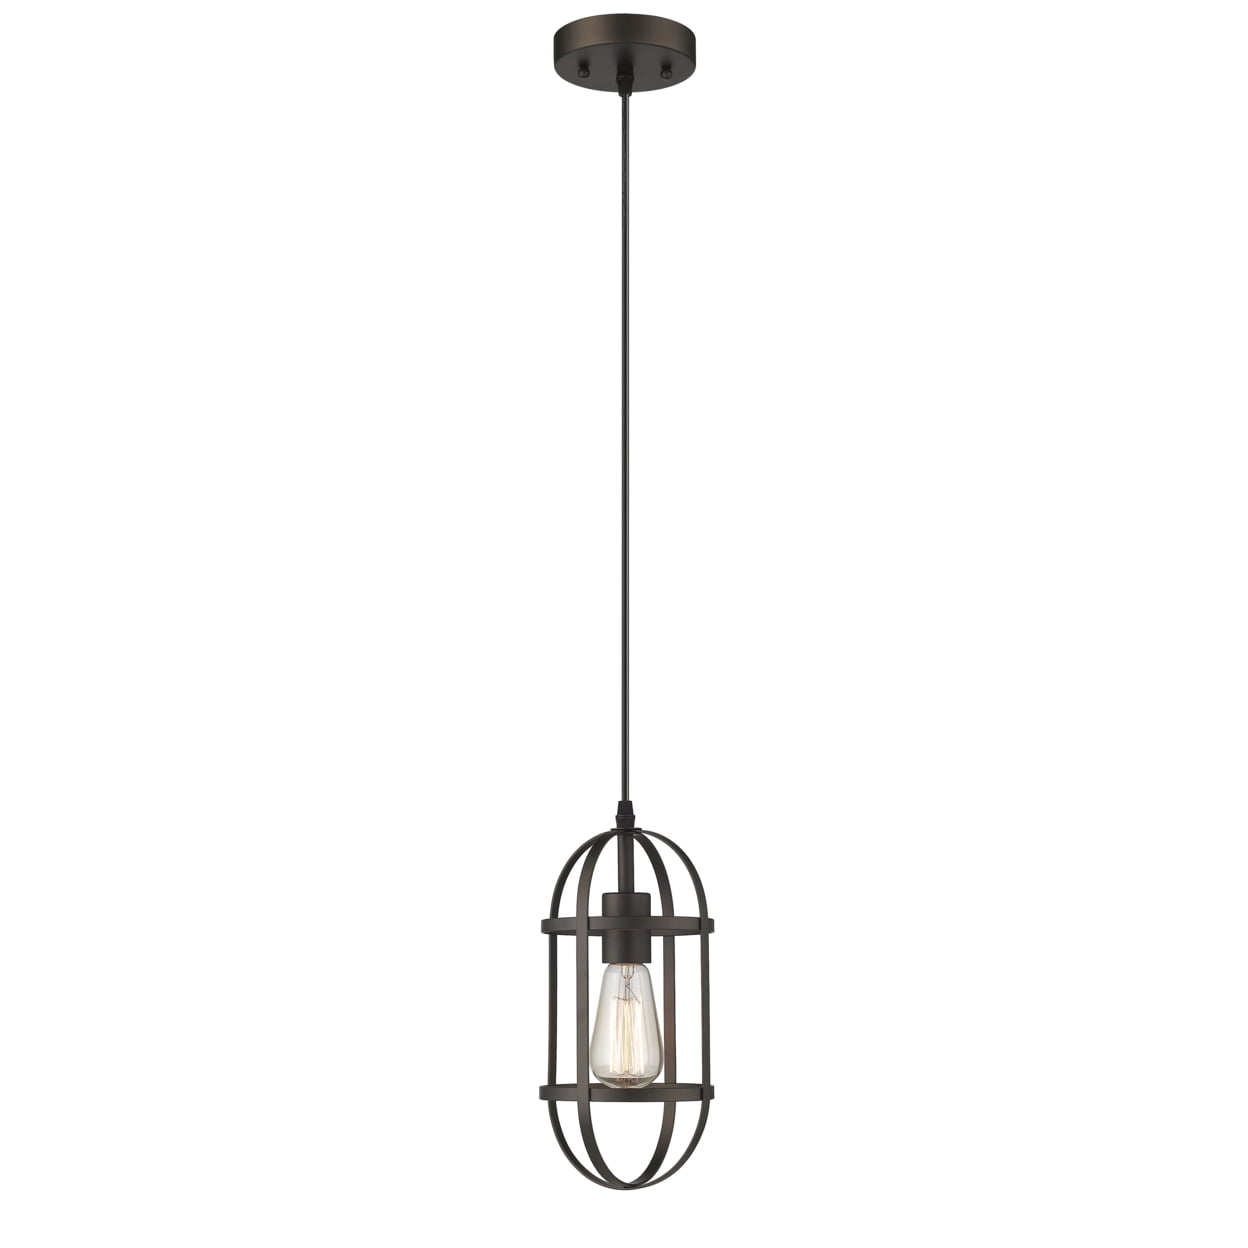 Ch2d126rb06-dp1 Ironclad Industrial 1 Light Rubbed Bronze Mini Ceiling Pendant - 5.5 In.